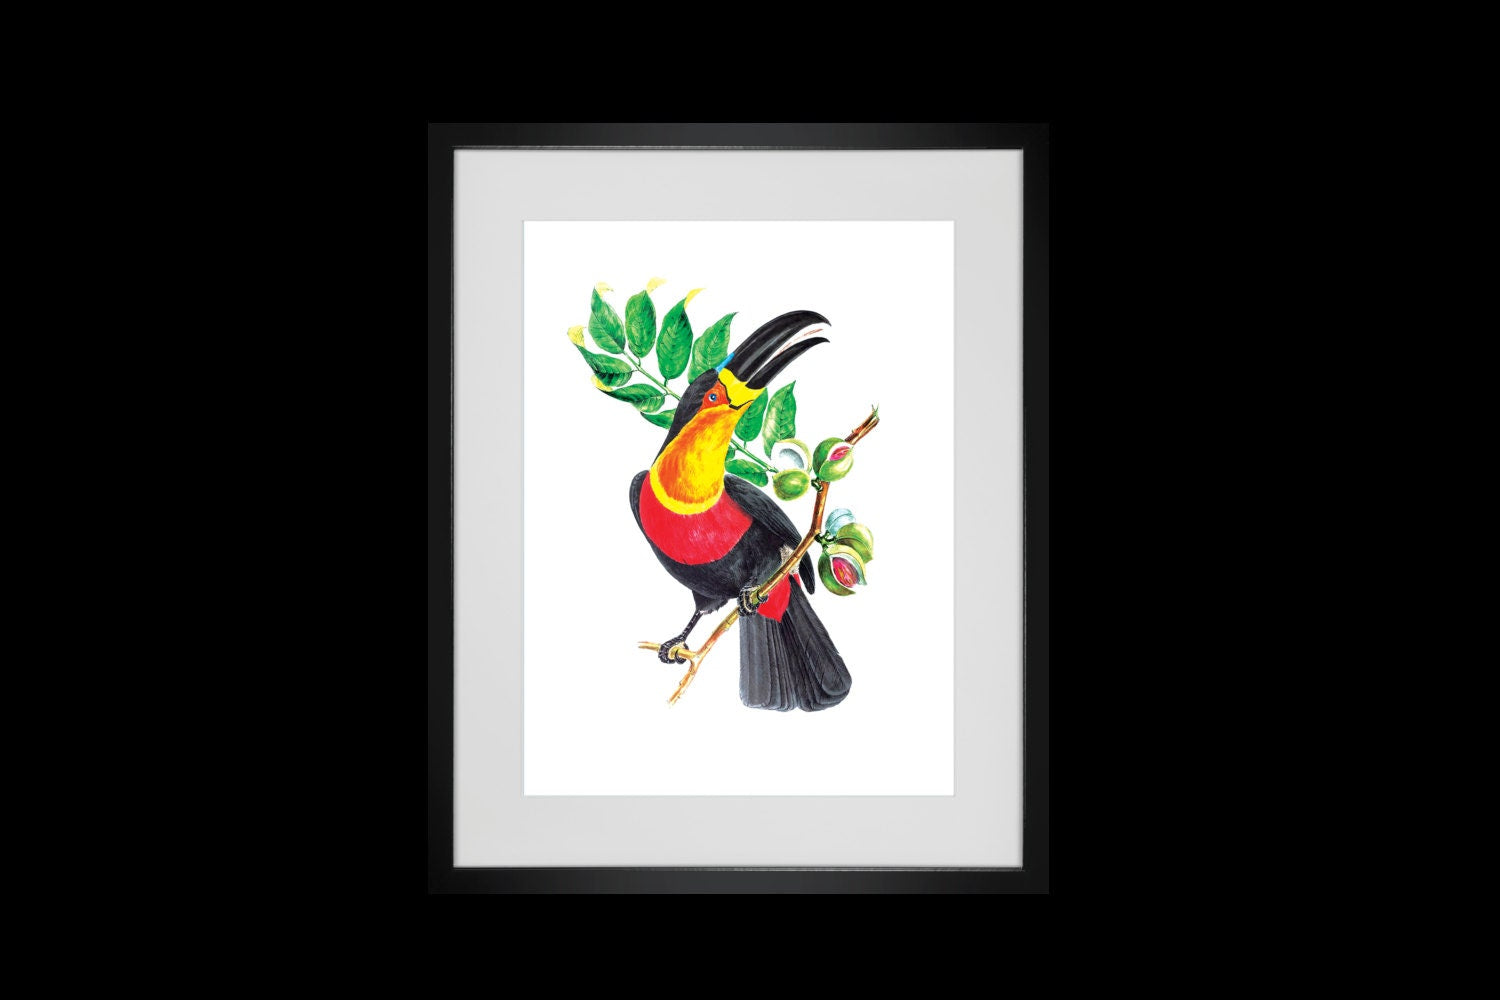 Antique Bird Prints Wall Decor 4 Colorful Bird Art Prints For Bedroom, Living Room Kitchen Pictures Vintage Scientific Illustration Wall Art